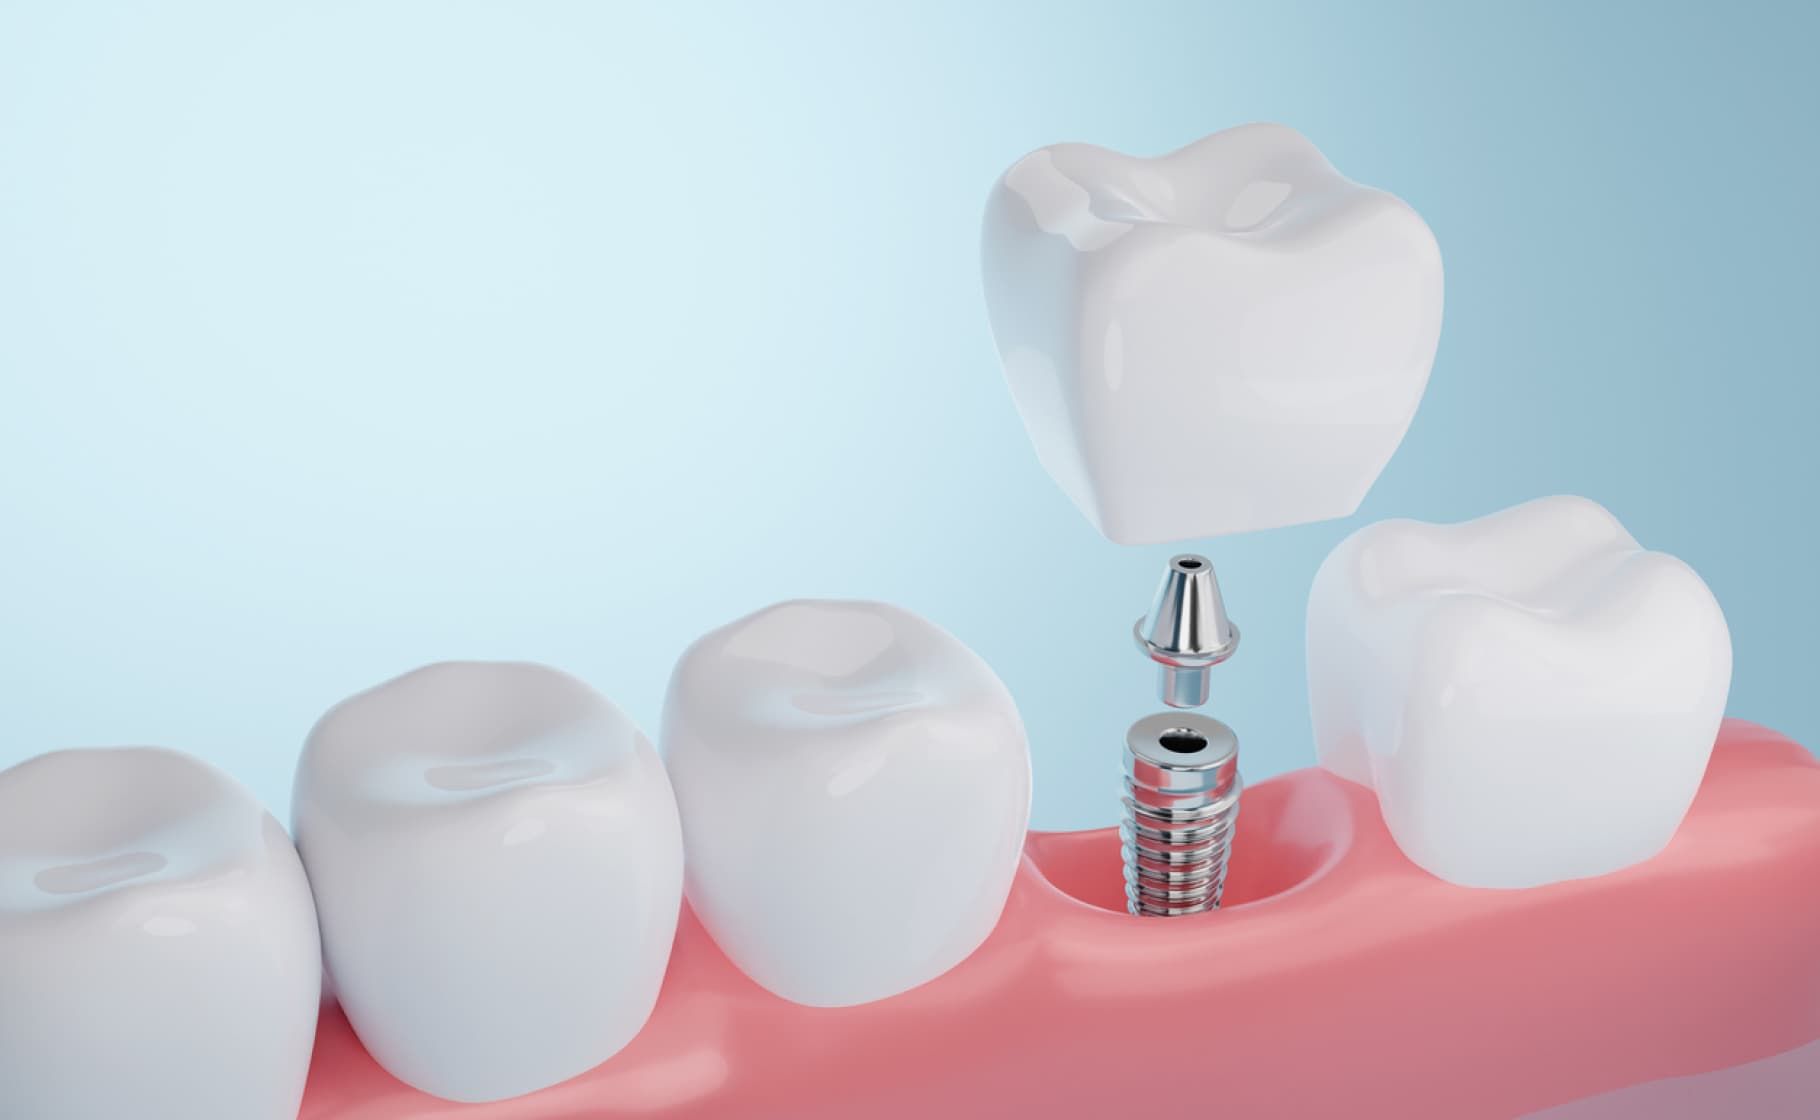 3D rending of a dental implant which provides high quality replacement for missing teeth